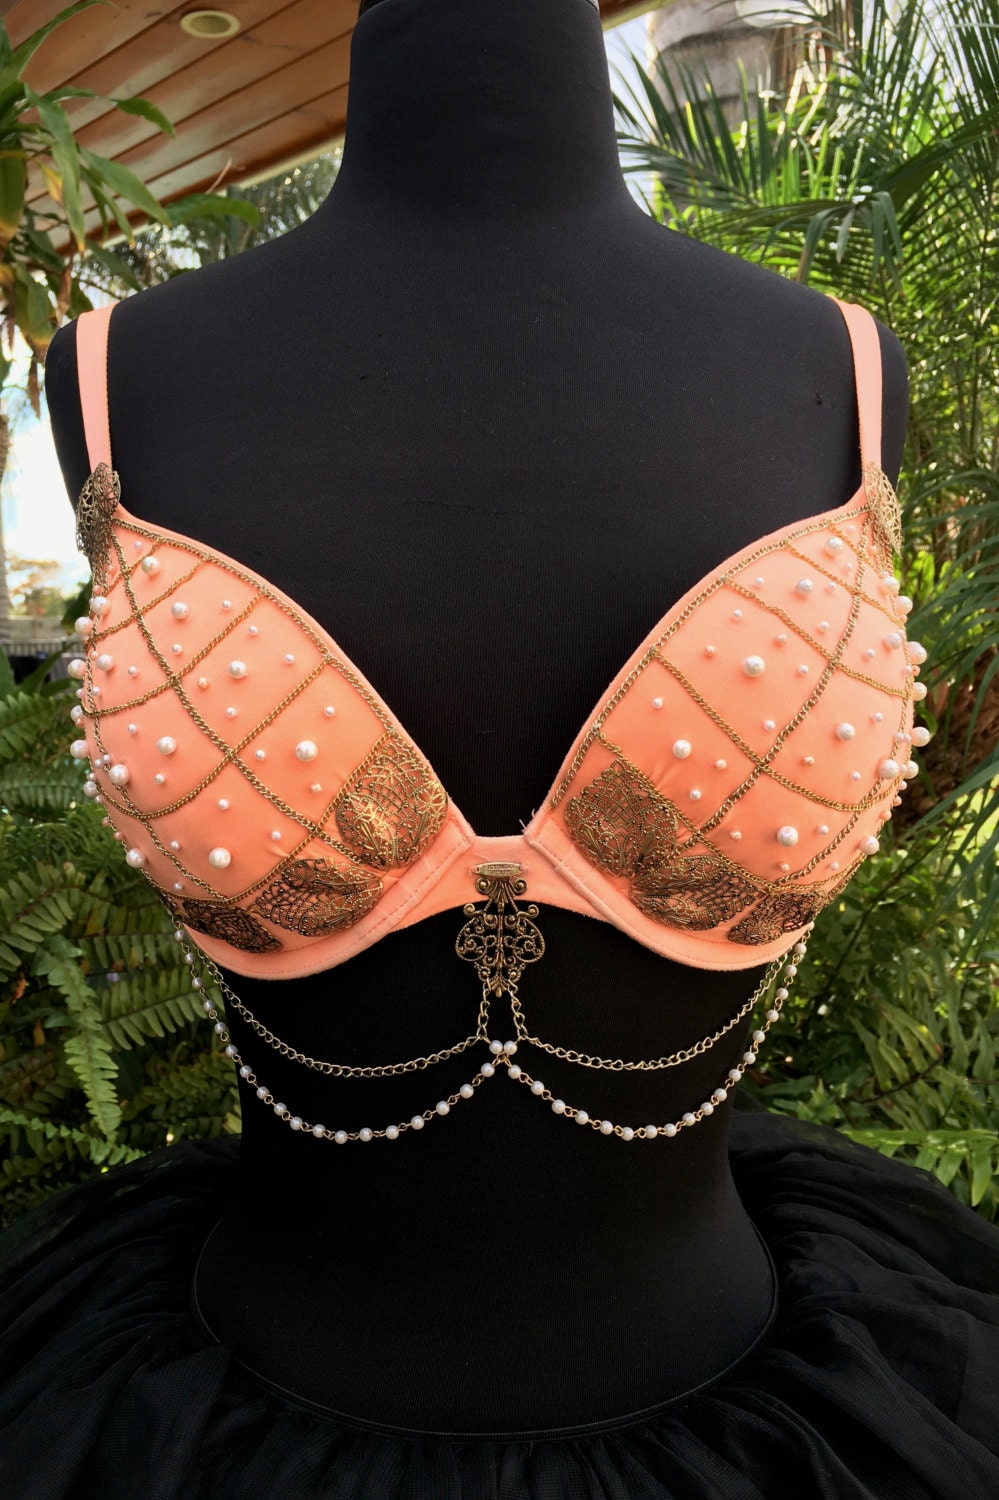 Red And Gold Metallic Spiked Covered Bra, Bikini, And Shoulder Pads